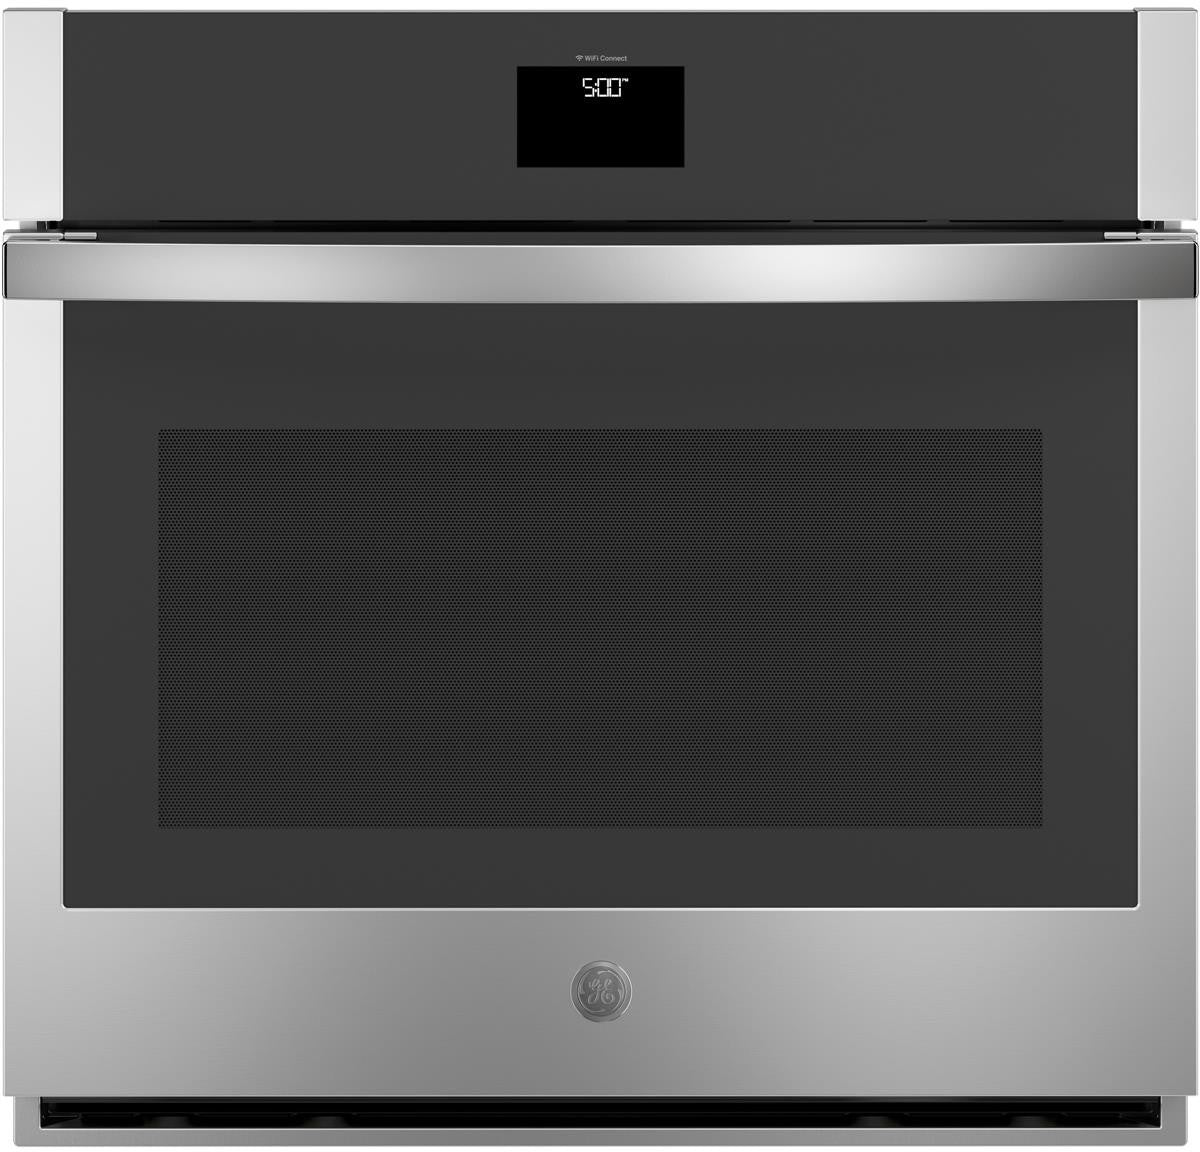 30" Built-in Wall Convection Oven